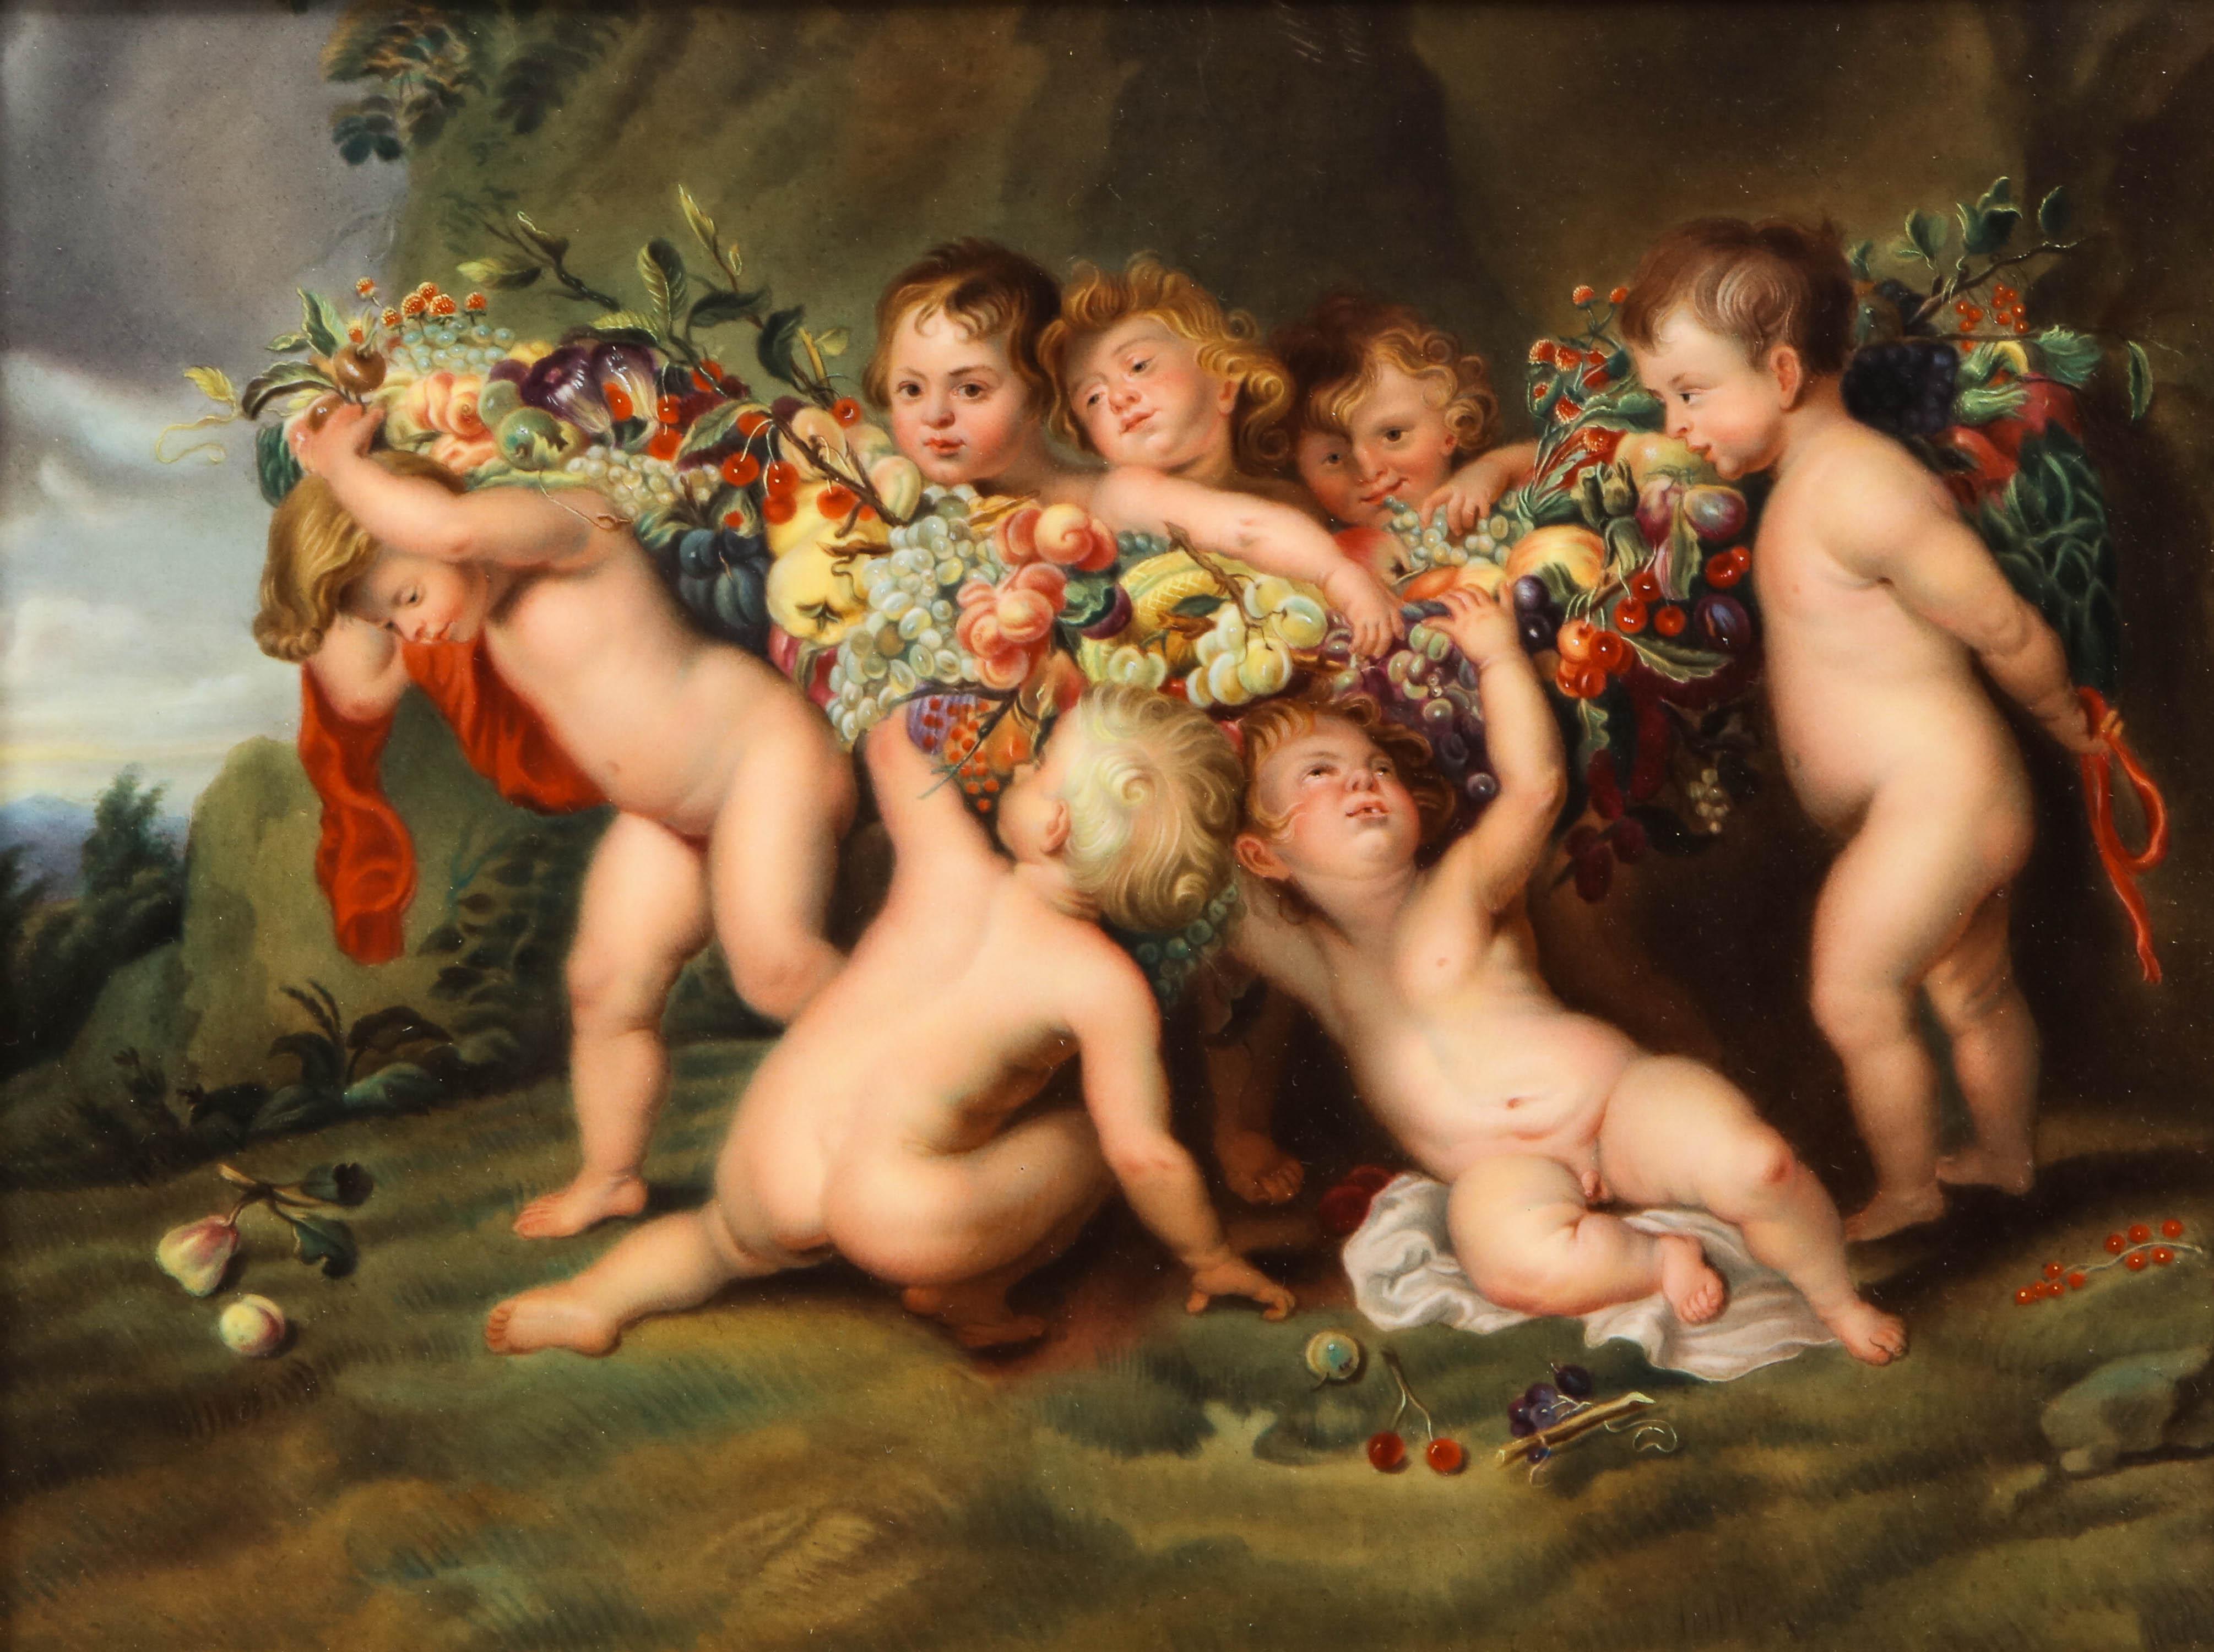 A fabulous antique hand painted KPM Porcelain plaque, depicting seven cherubs all helping to carry a big Garland of fruit and flowers, after Peter Paul Rubens, Impressed KPM and Scepter marks on back. This marvelous plaque is after the masterpiece